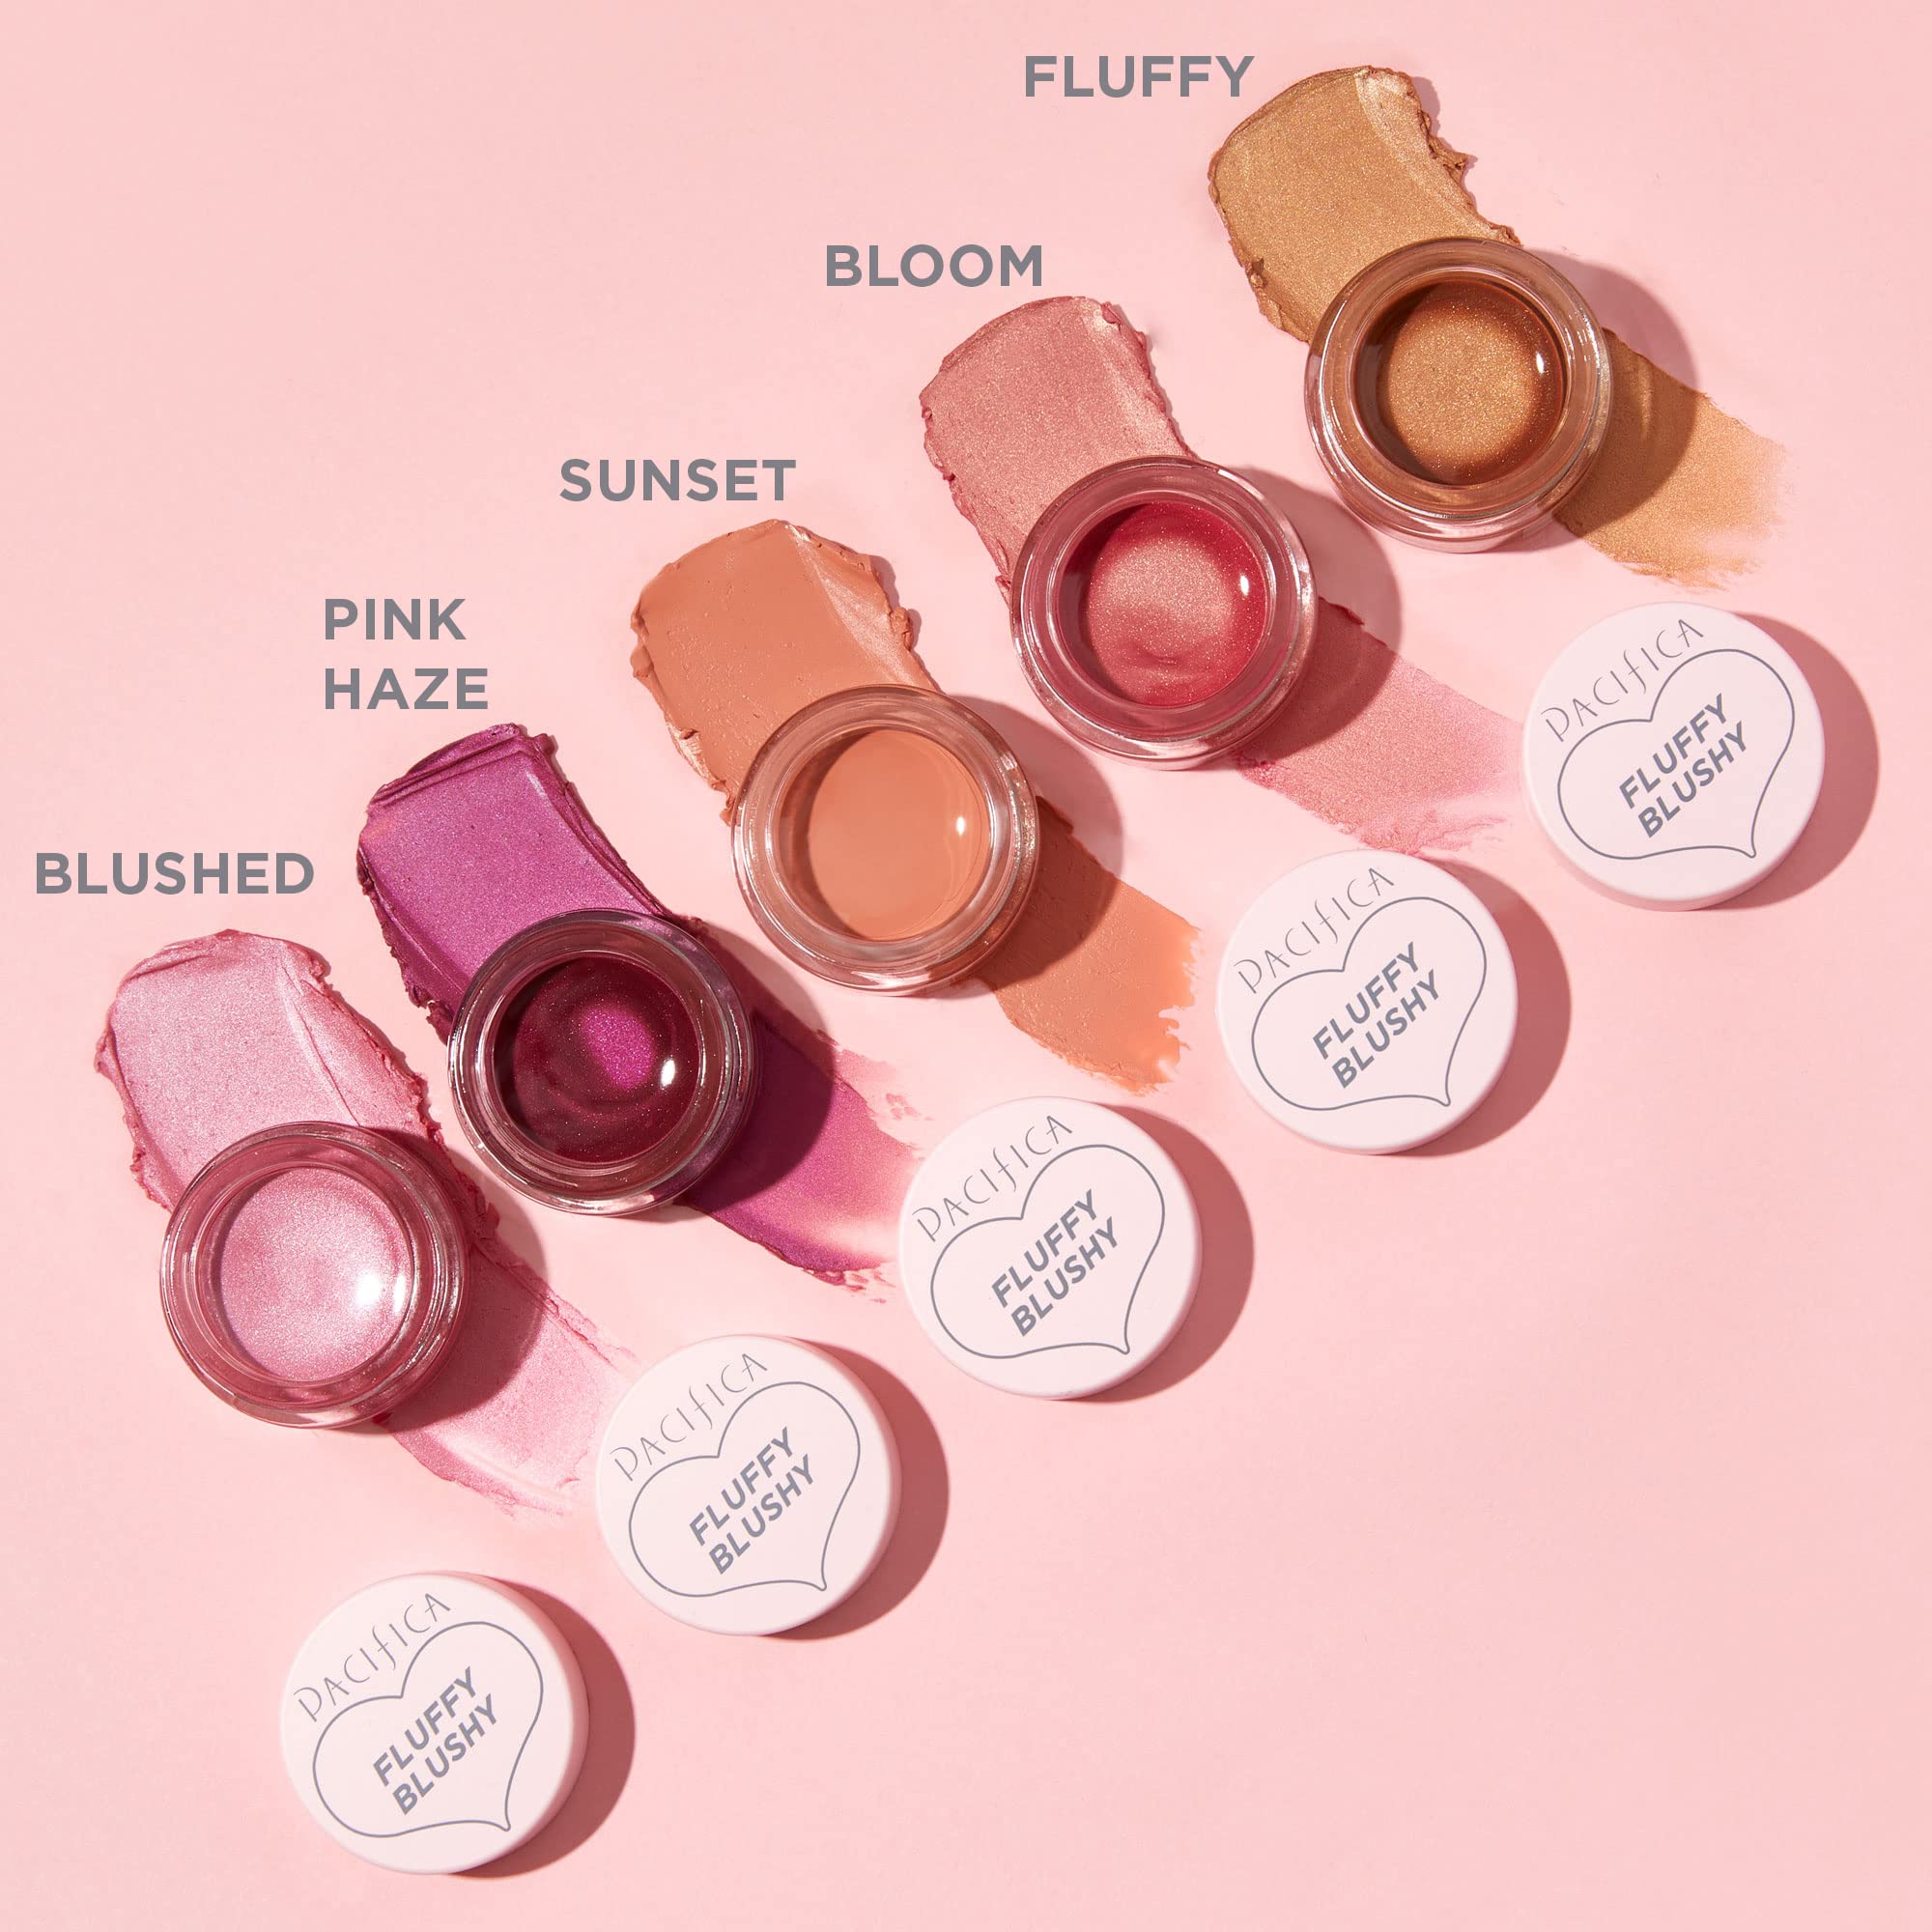 Pacifica Beauty | Fluffy Blushy Cream Blush for Cheeks + Lips | Creamy, Lightweight, Versatile, Easy-To-Use Formula | Hydrating Vegan Collagen | Pigmented Buildable Coverage | Vegan + Cruelty Free